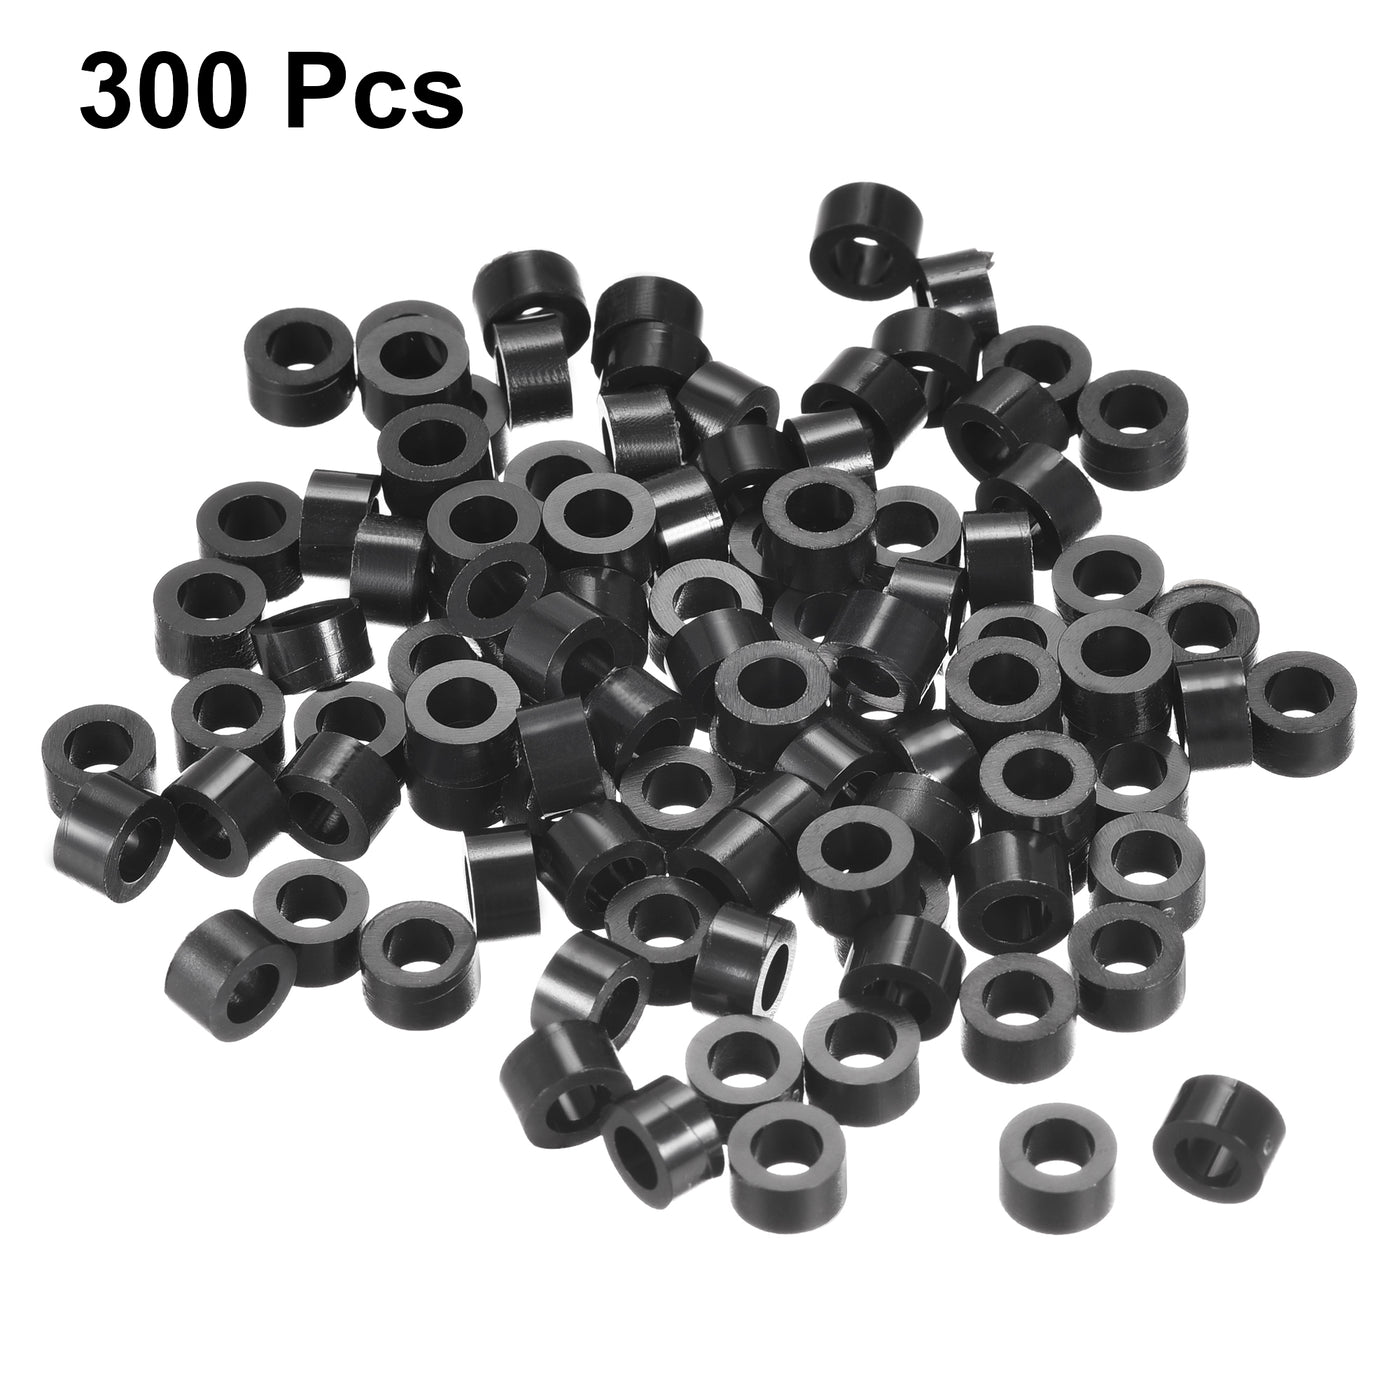 uxcell Uxcell Nylon Round Spacer Washer 4.2mmx7mmx4mm for M4 Screws Black 300Pcs